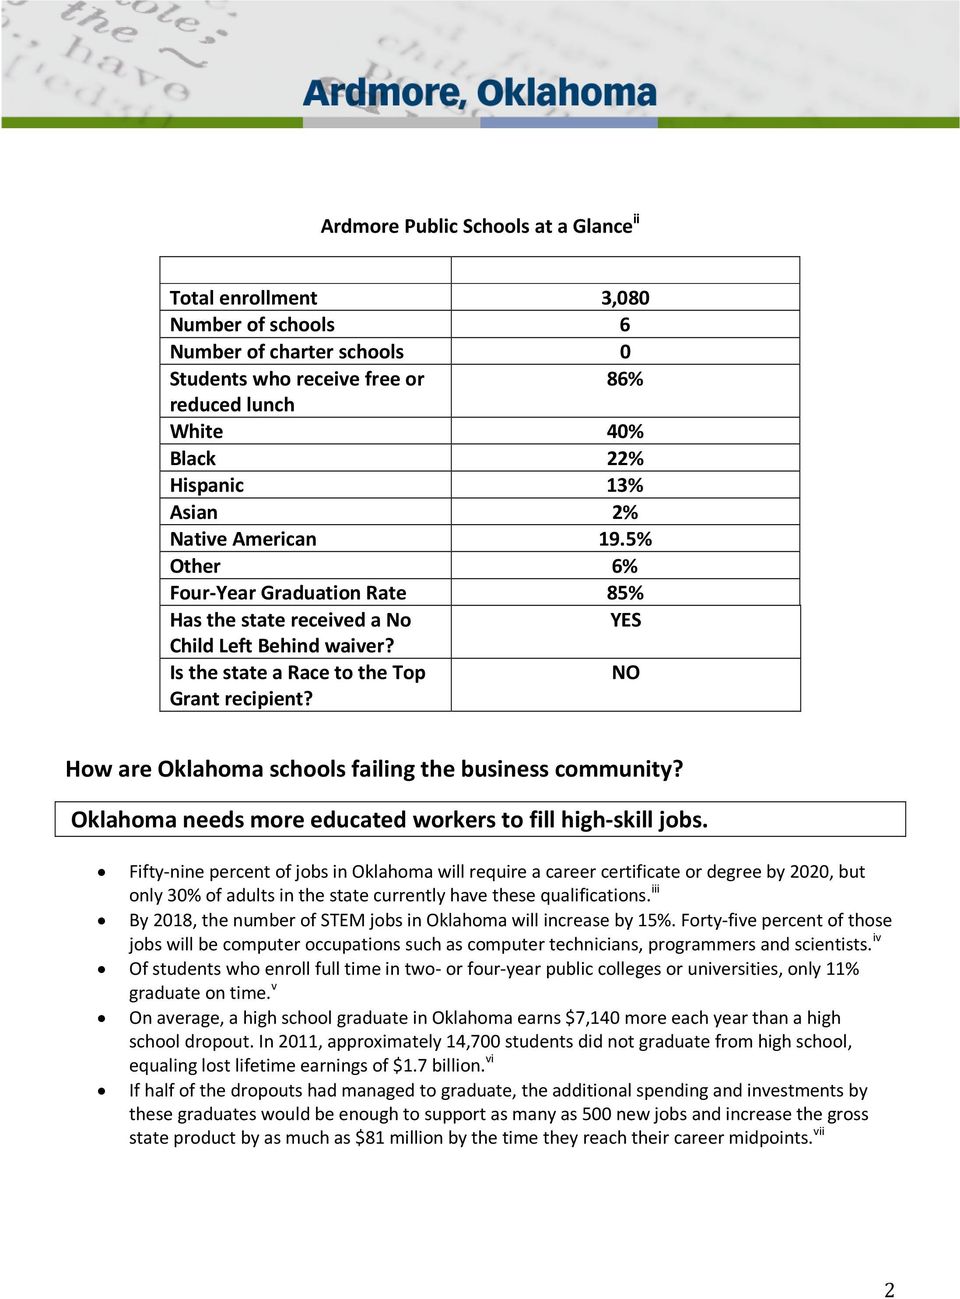 How are Oklahoma schools failing the business community? Oklahoma needs more educated workers to fill high-skill jobs.